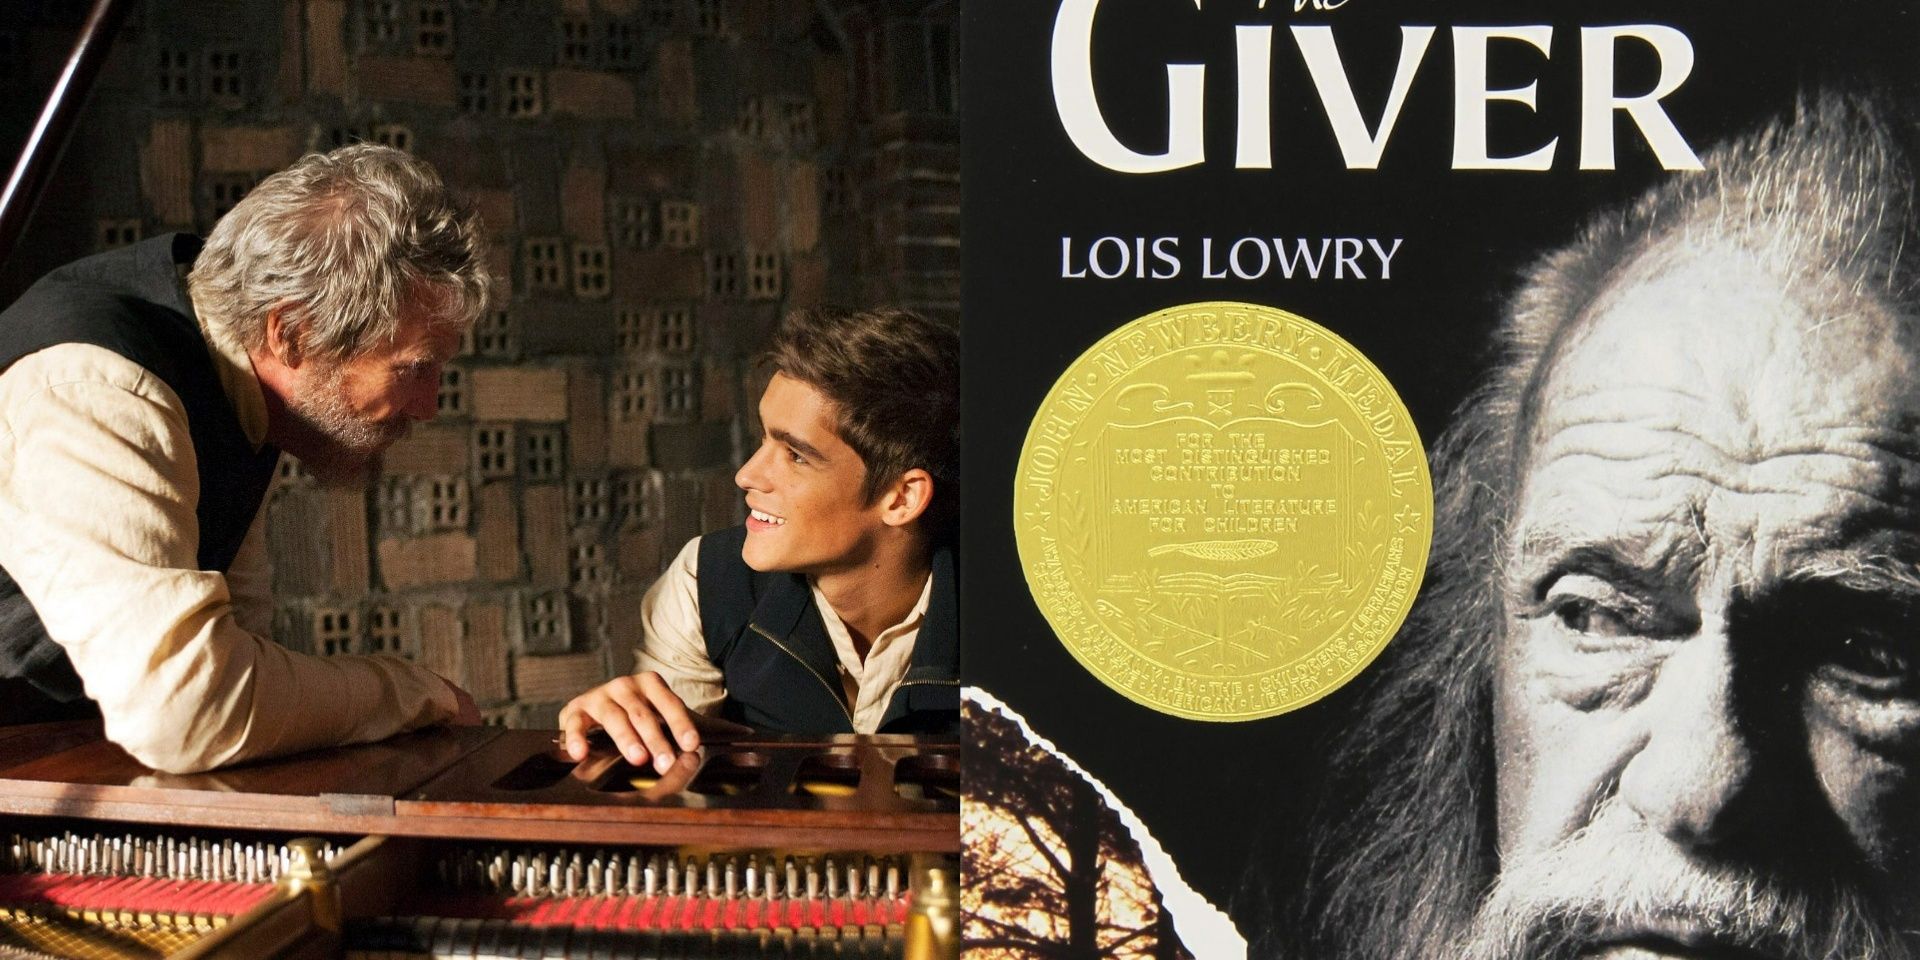 (Left) Man and boy at piano / (Right) The Giver Book cover 